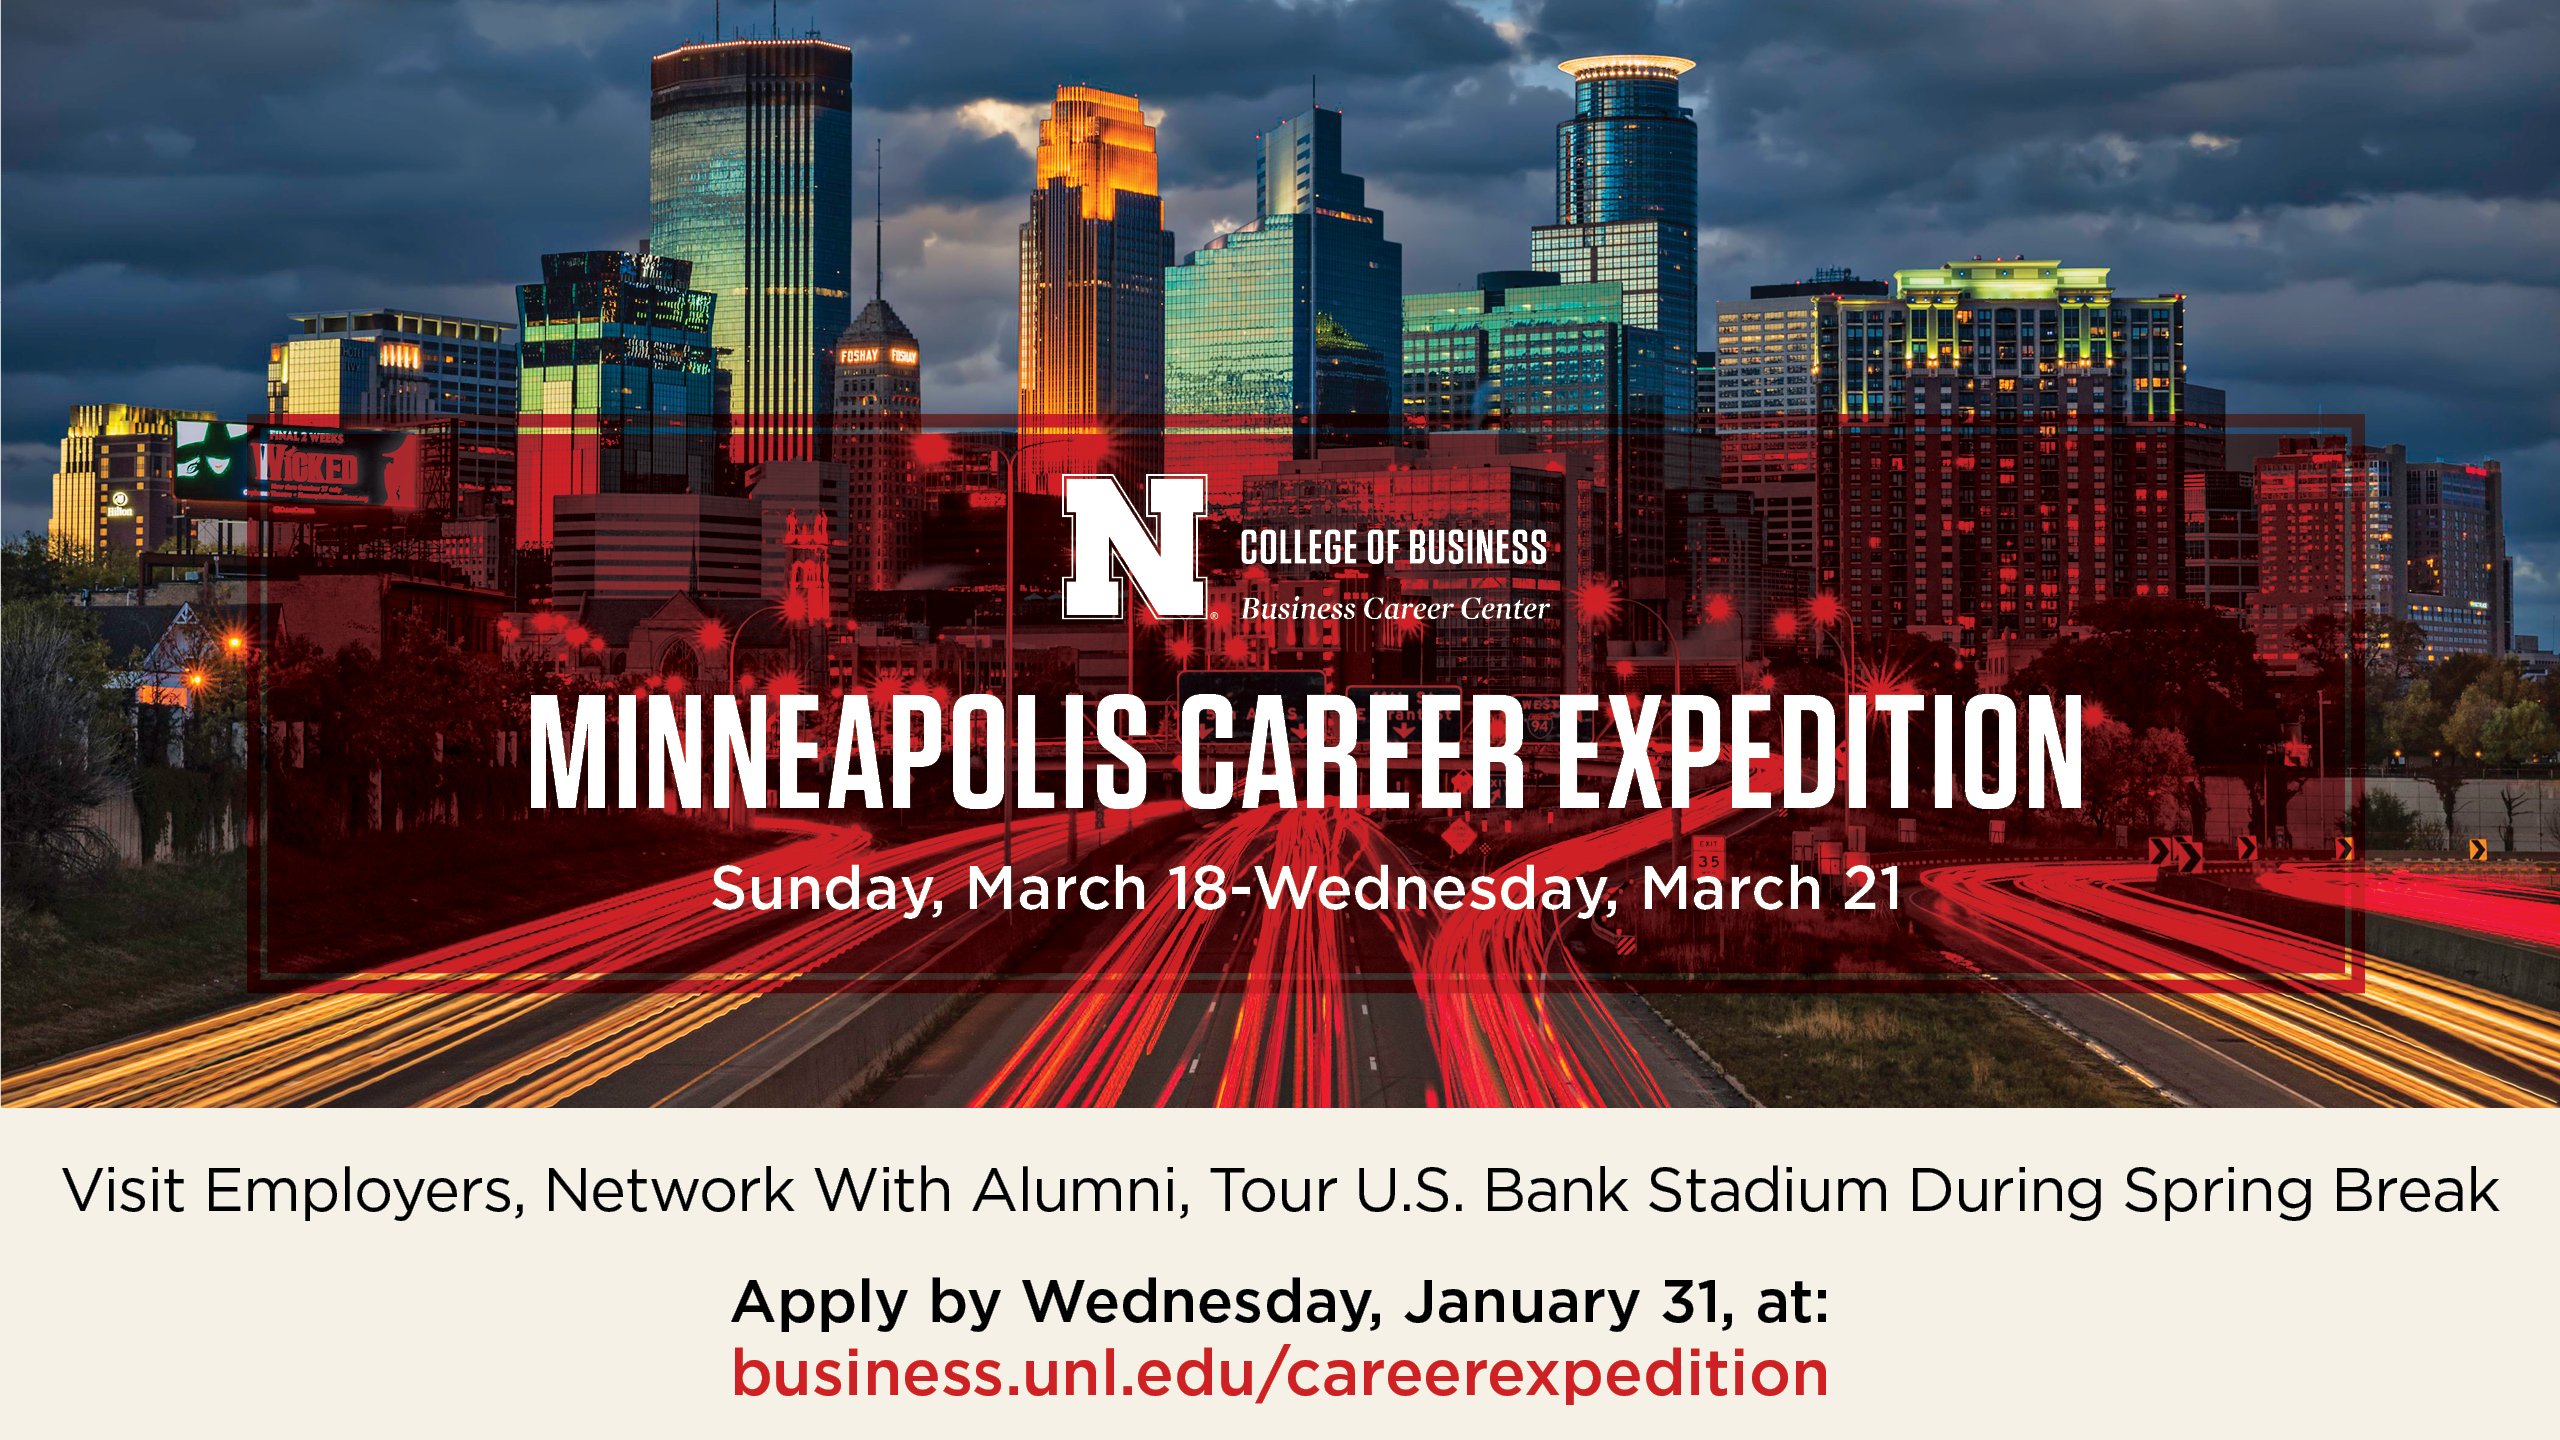 Explore Careers and Network in Minneapolis